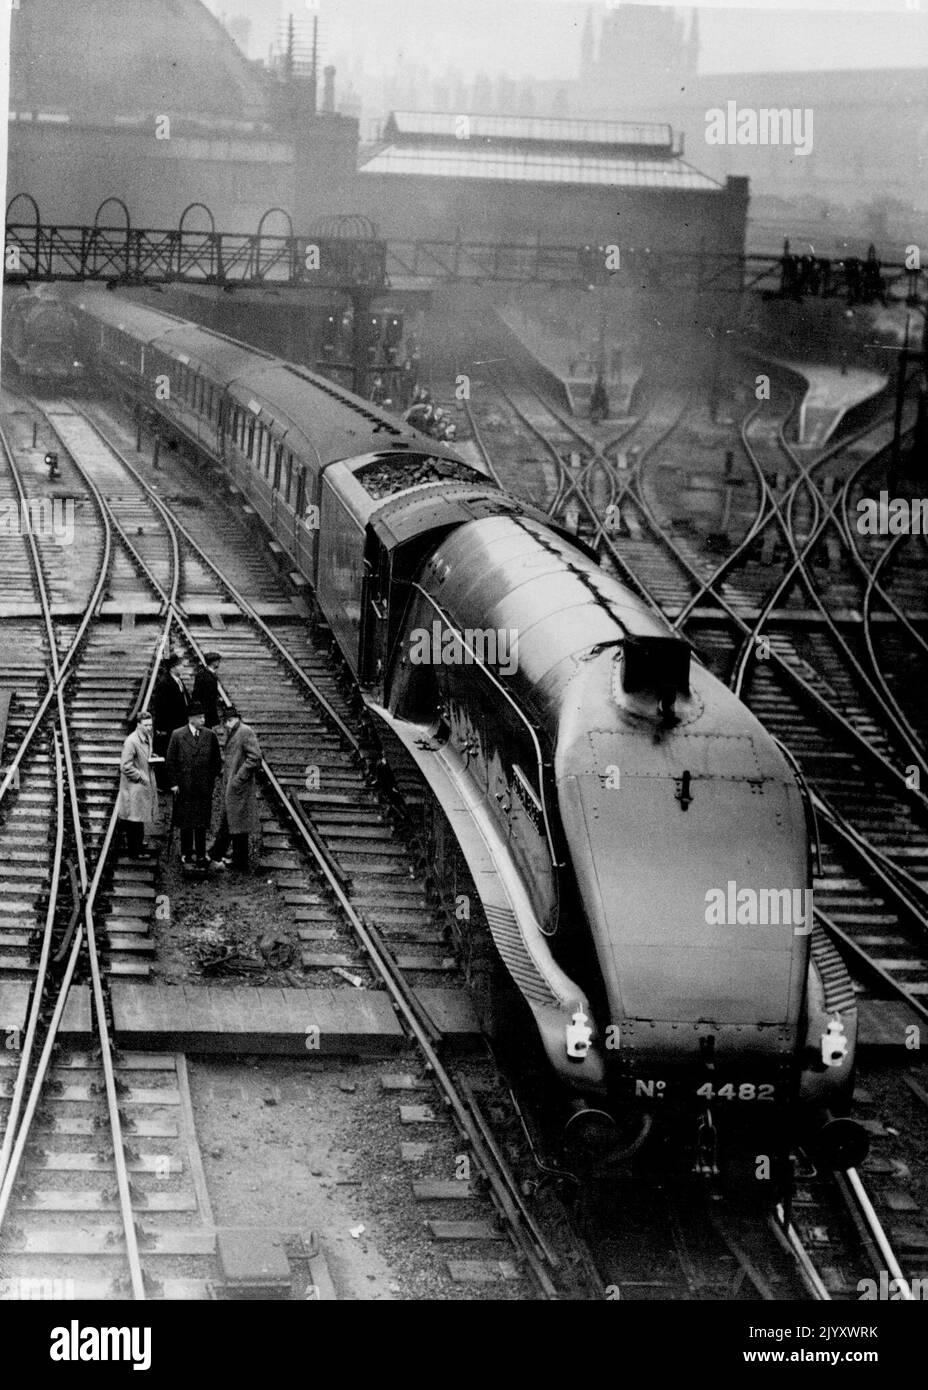 First Of 'Coronation' Streamlined Locomotives Leaves London On First Run - The 'Golden Engle' leaving King's Cross at the head of the Scottish express on its first run. First of the new streamlined super-Pacific type locomotives intended to work the record-breaking 'Coronation' expresses later in the year, the 'Golden Eagle' left King's Cross Station, London, on its first run. The locomotive was drawing the London Edinburgh express - one of the heaviest and fastest trains of the day - as far as Neweastle. January 6, 1937. Stock Photo